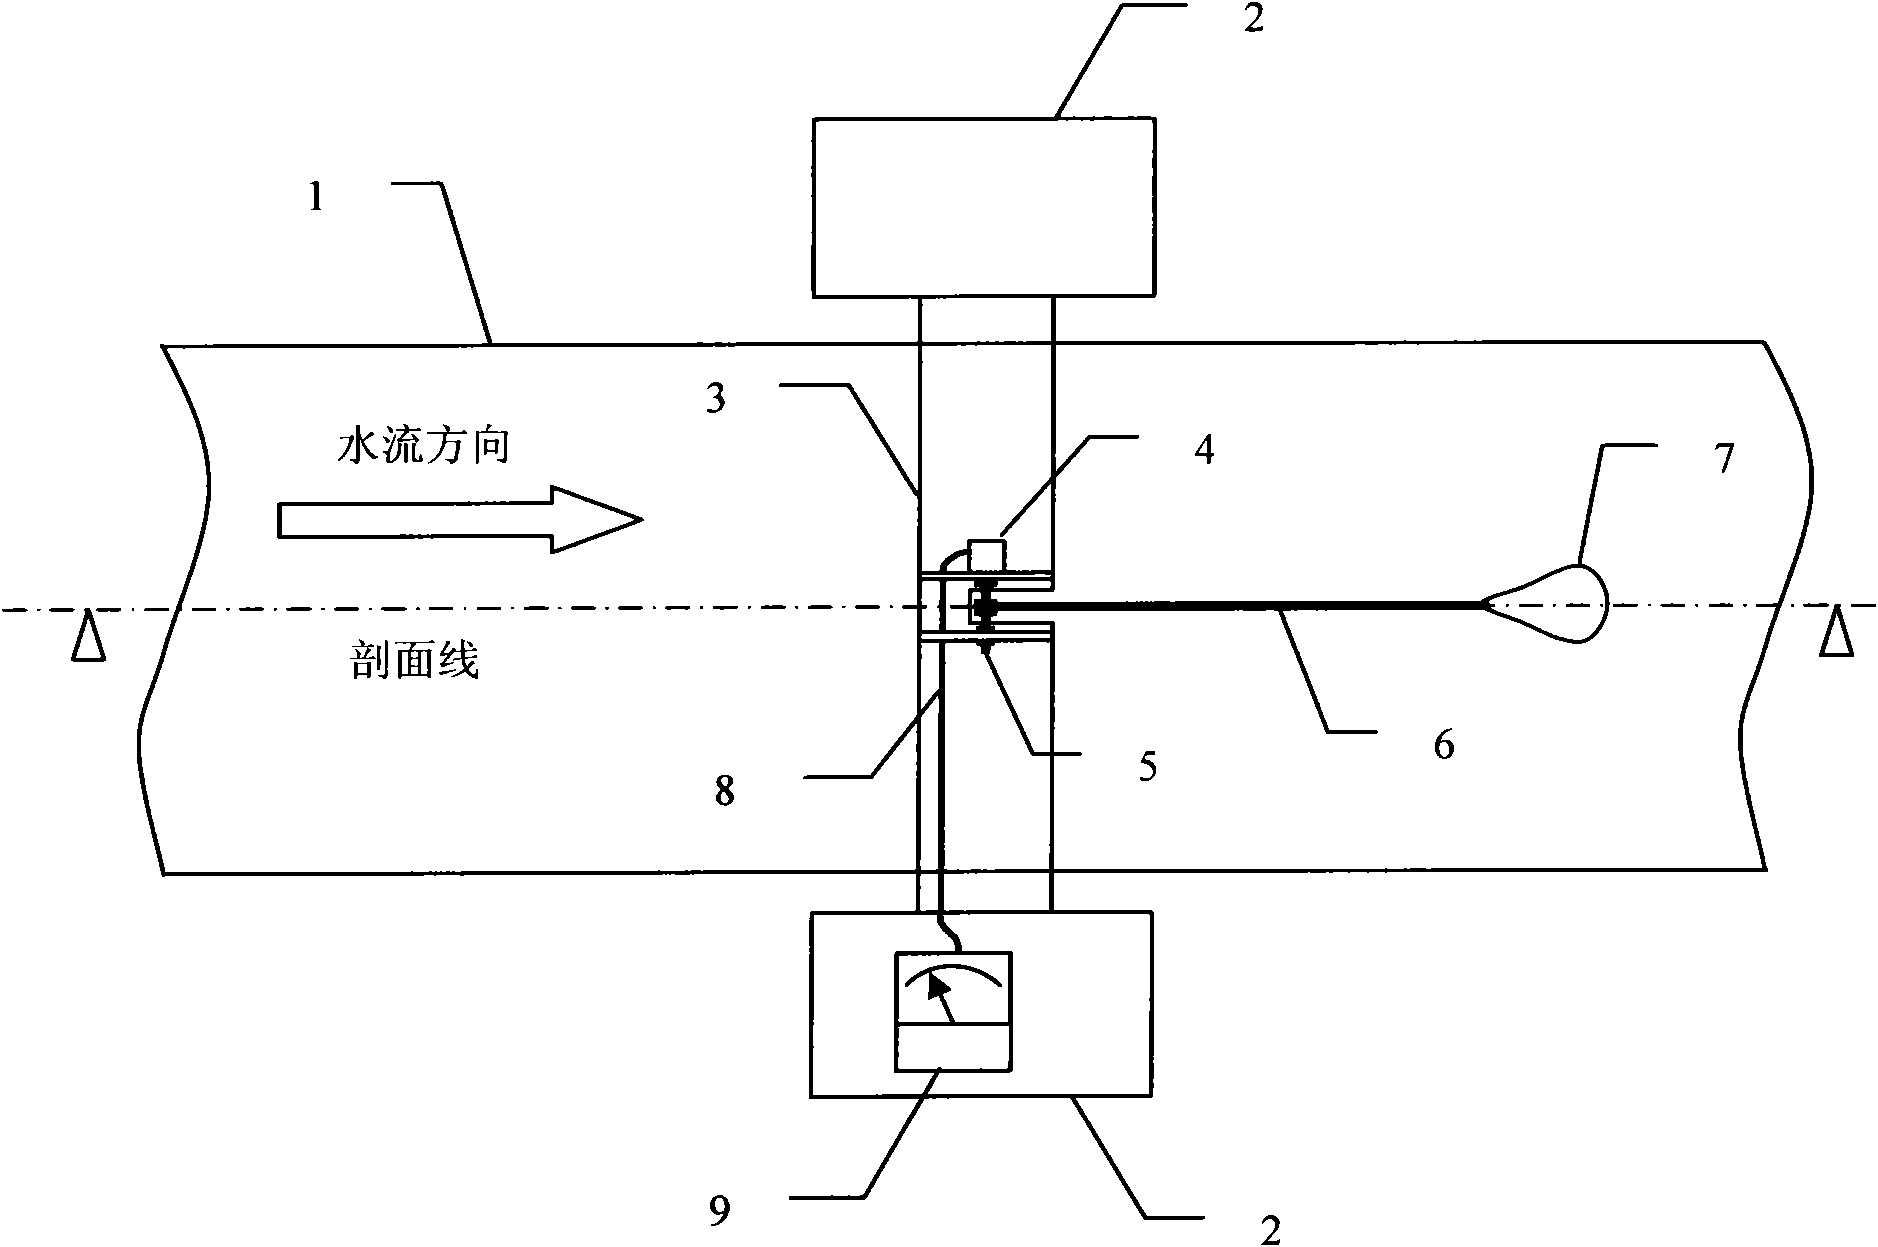 Flowmeter for final-stage channel